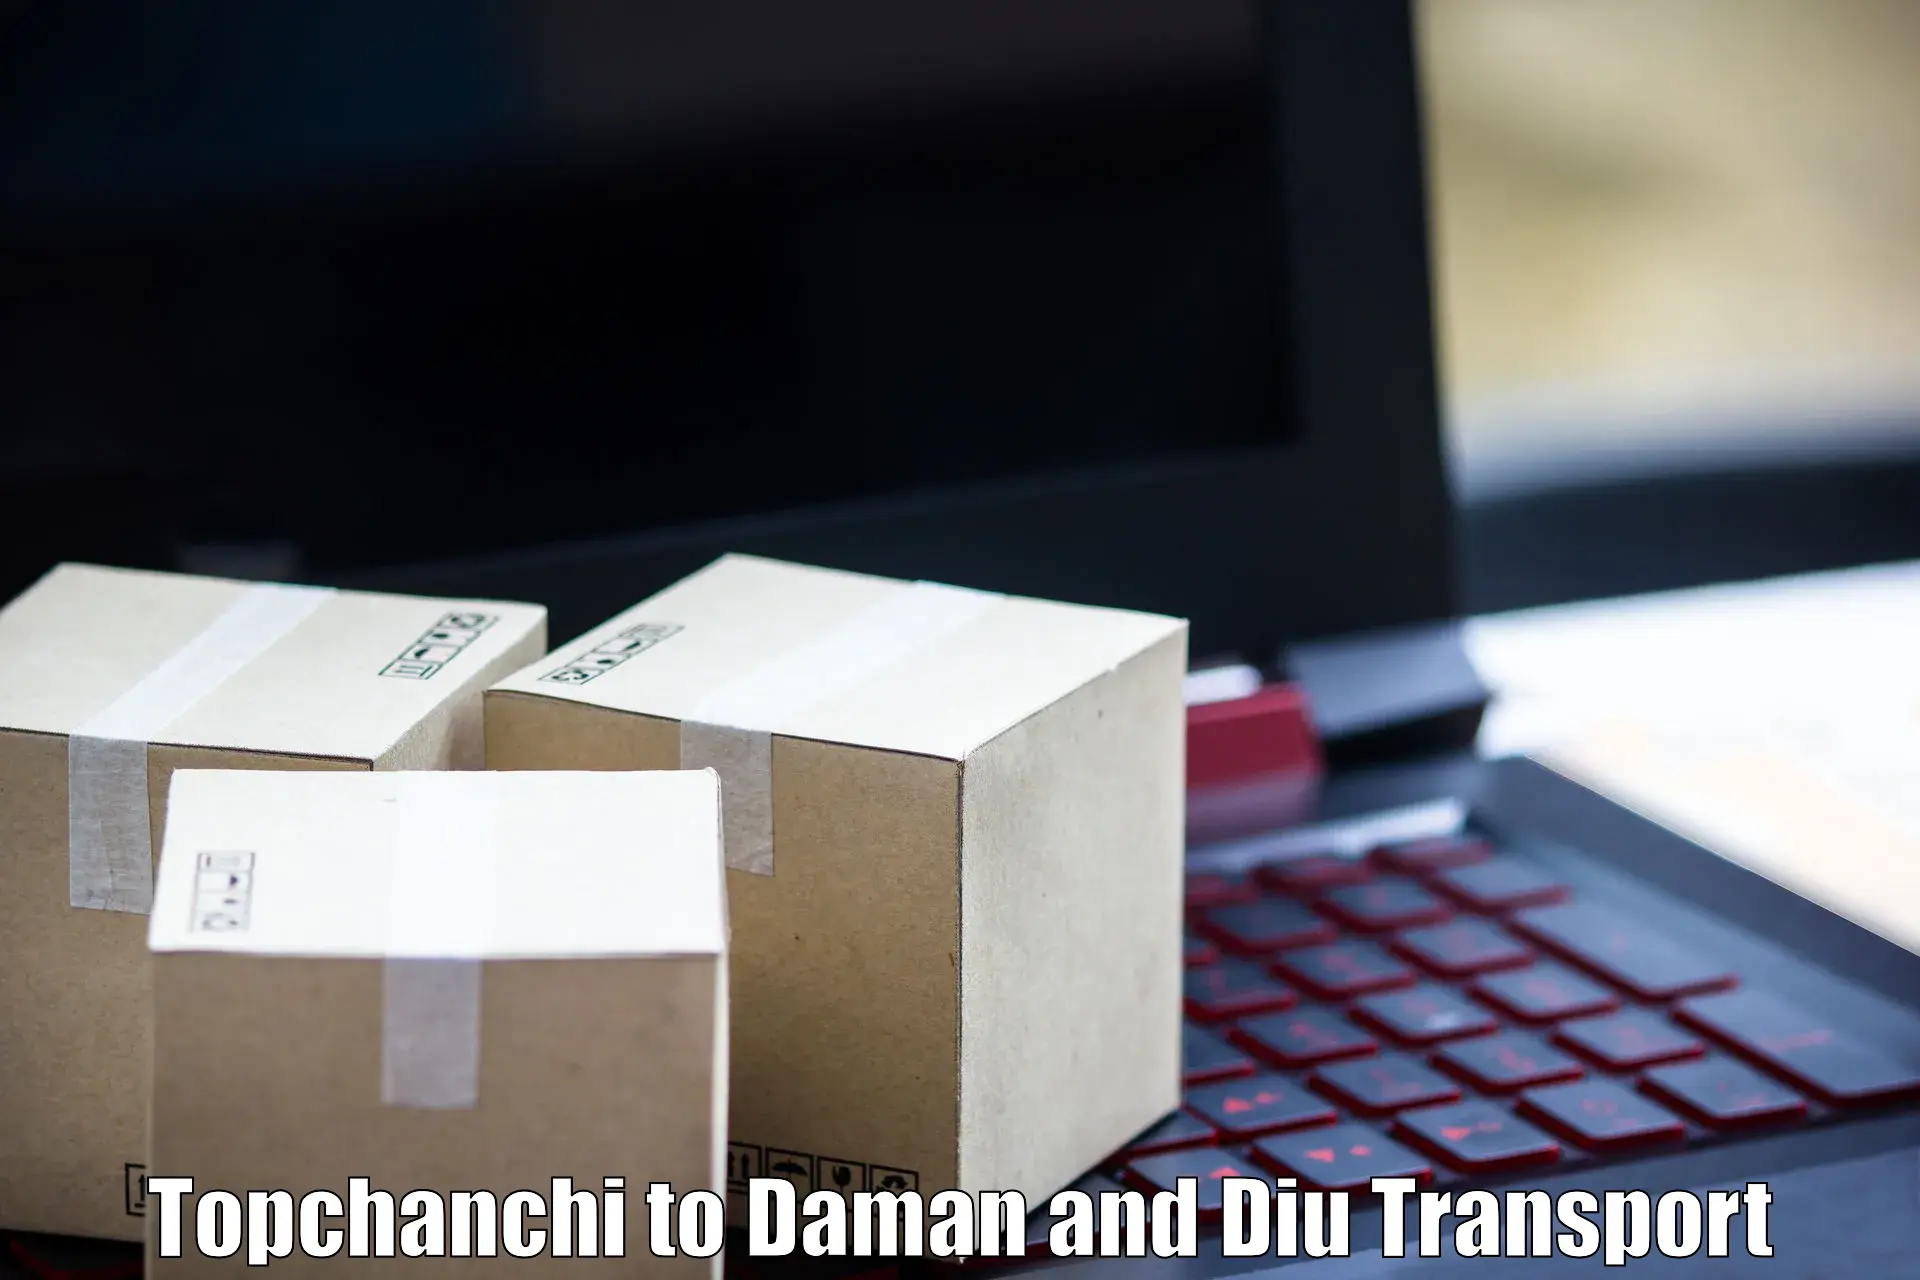 Air cargo transport services Topchanchi to Daman and Diu